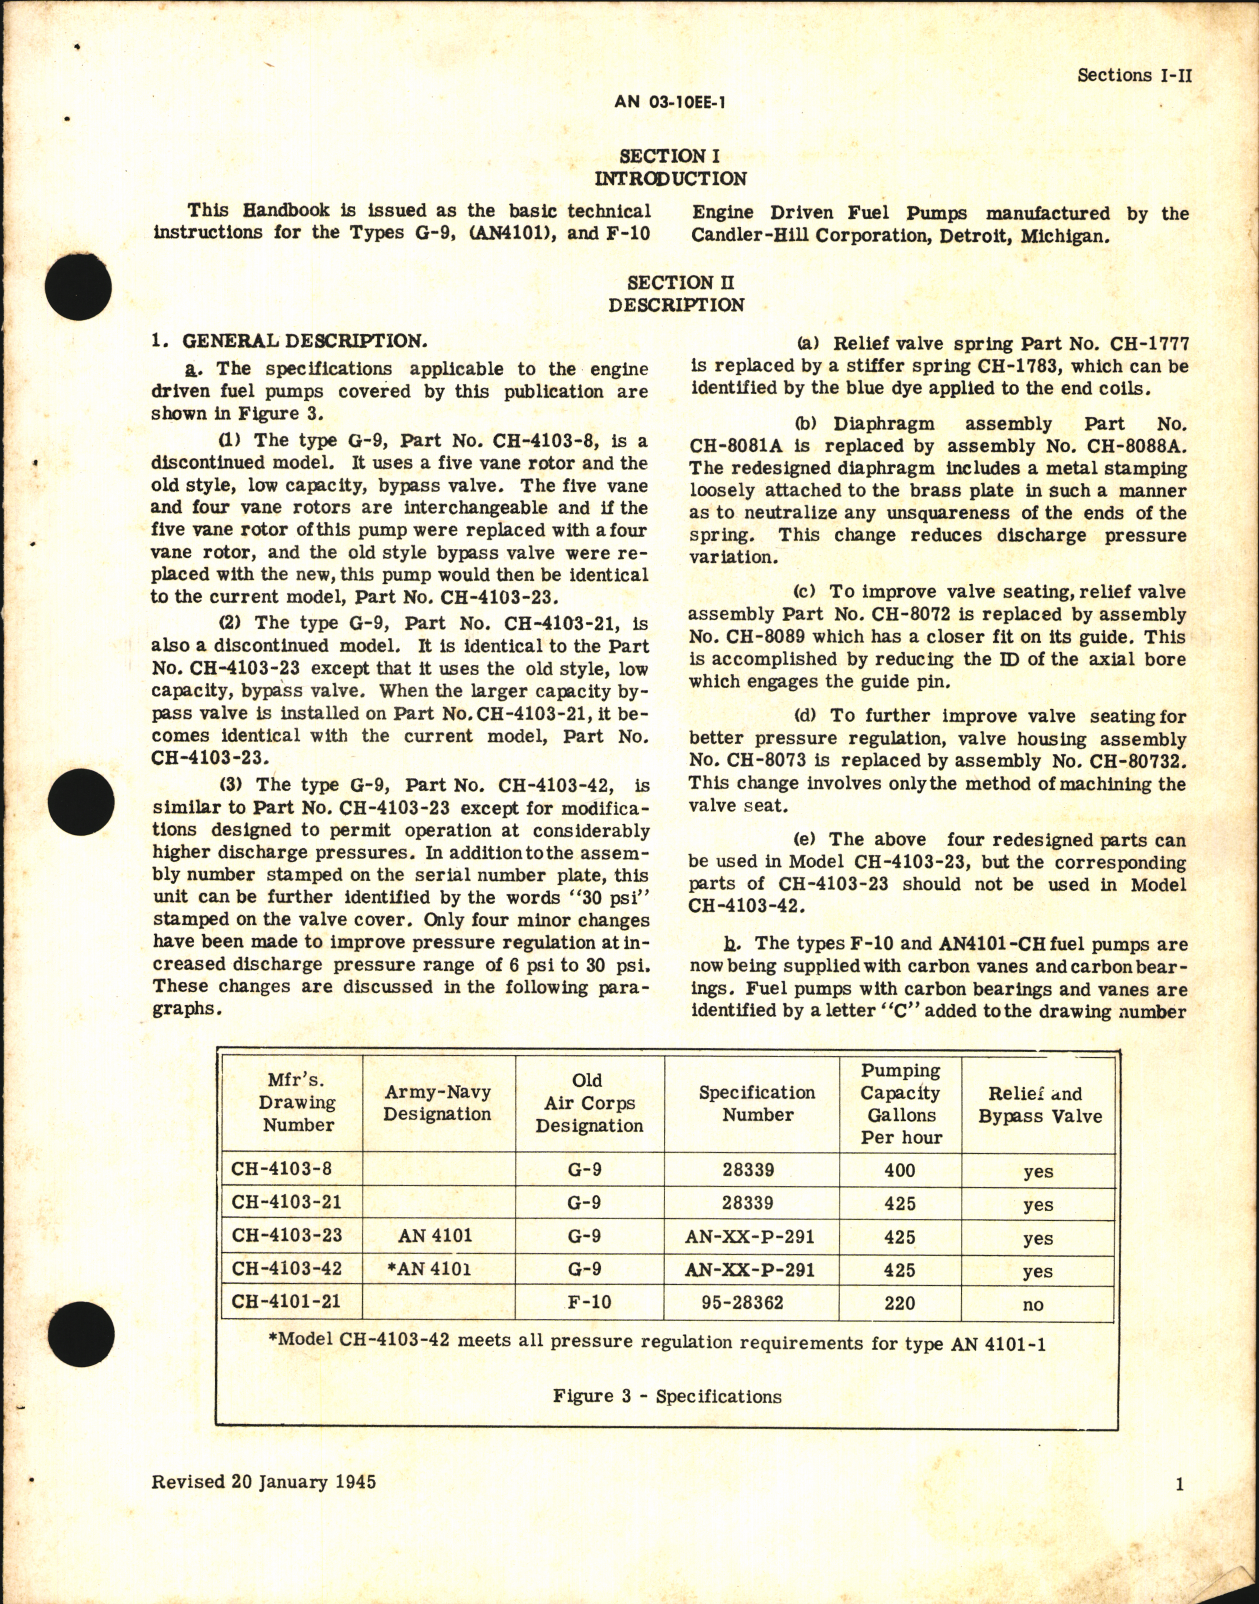 Sample page 5 from AirCorps Library document: Operation, Service, & Overhaul Inst w/ Parts Catalog for Engine-Driven Fuel Pumps